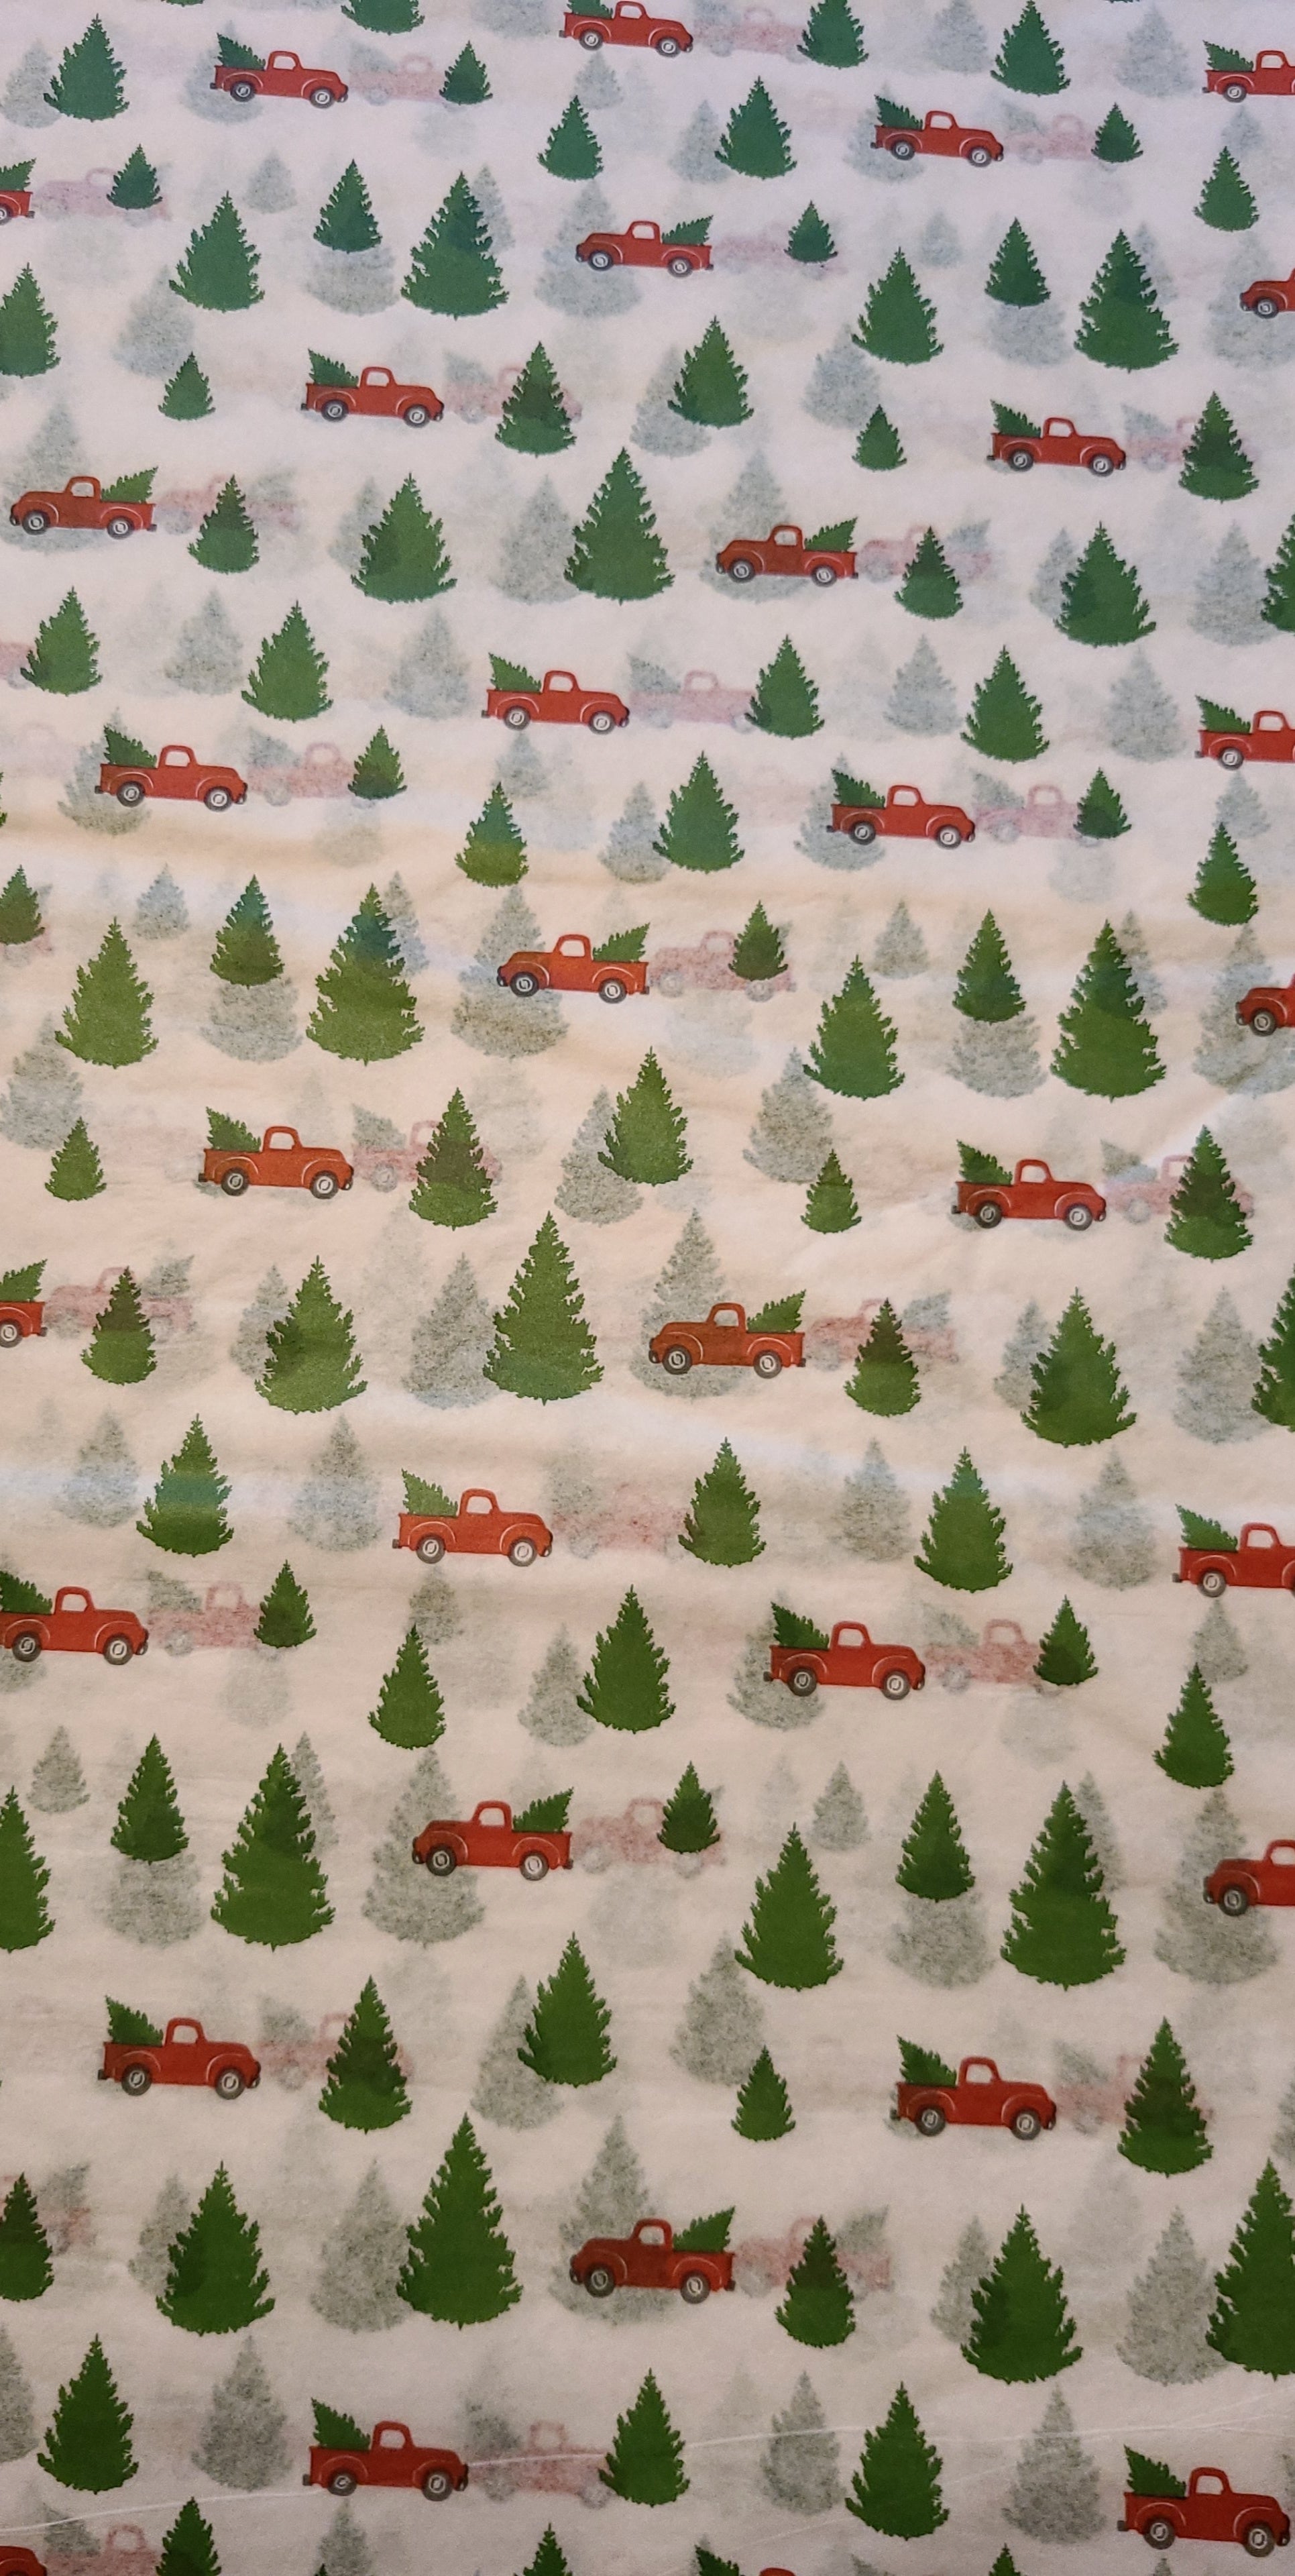 Tissue Paper - Tree Farm / Red Truck [12] – Delaney & Co. Mailers